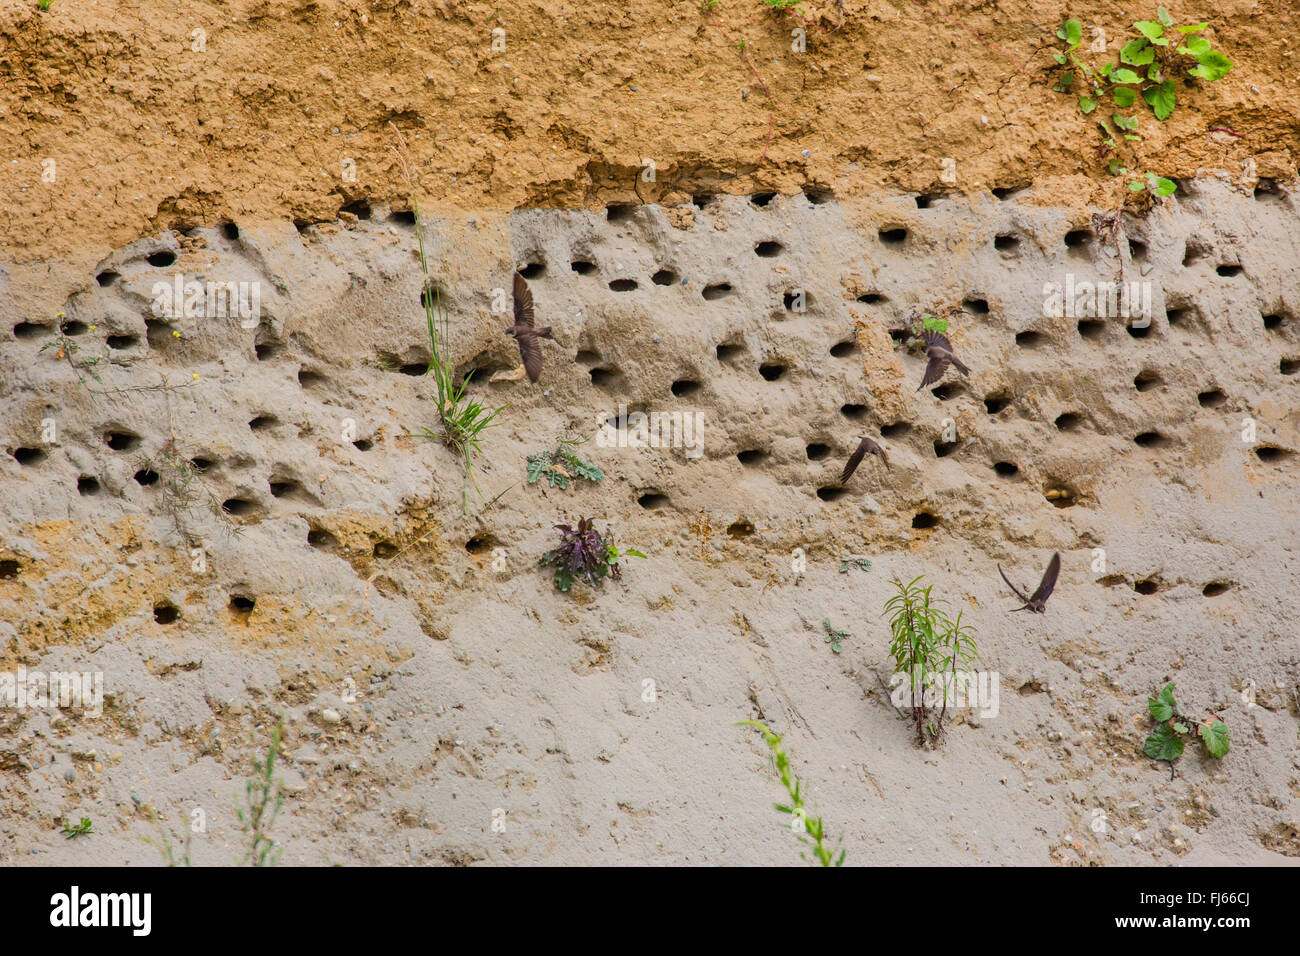 sand martin (Riparia riparia), shore with many breeding caves and flying adults in front, Germany, Bavaria Stock Photo